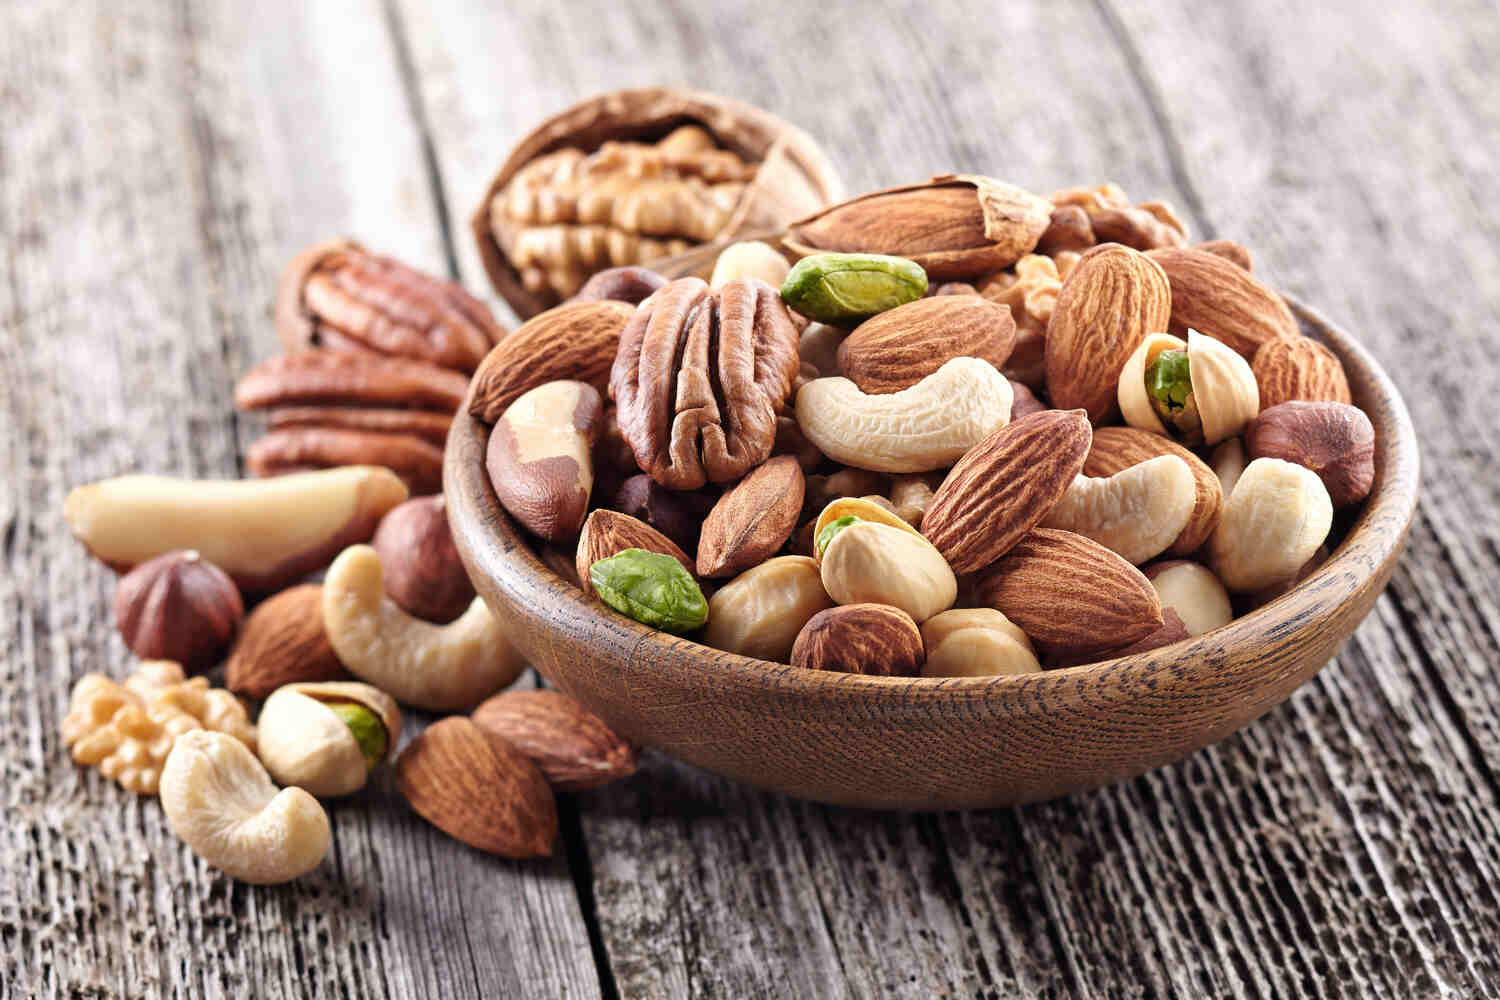 Nuts are also a superfood